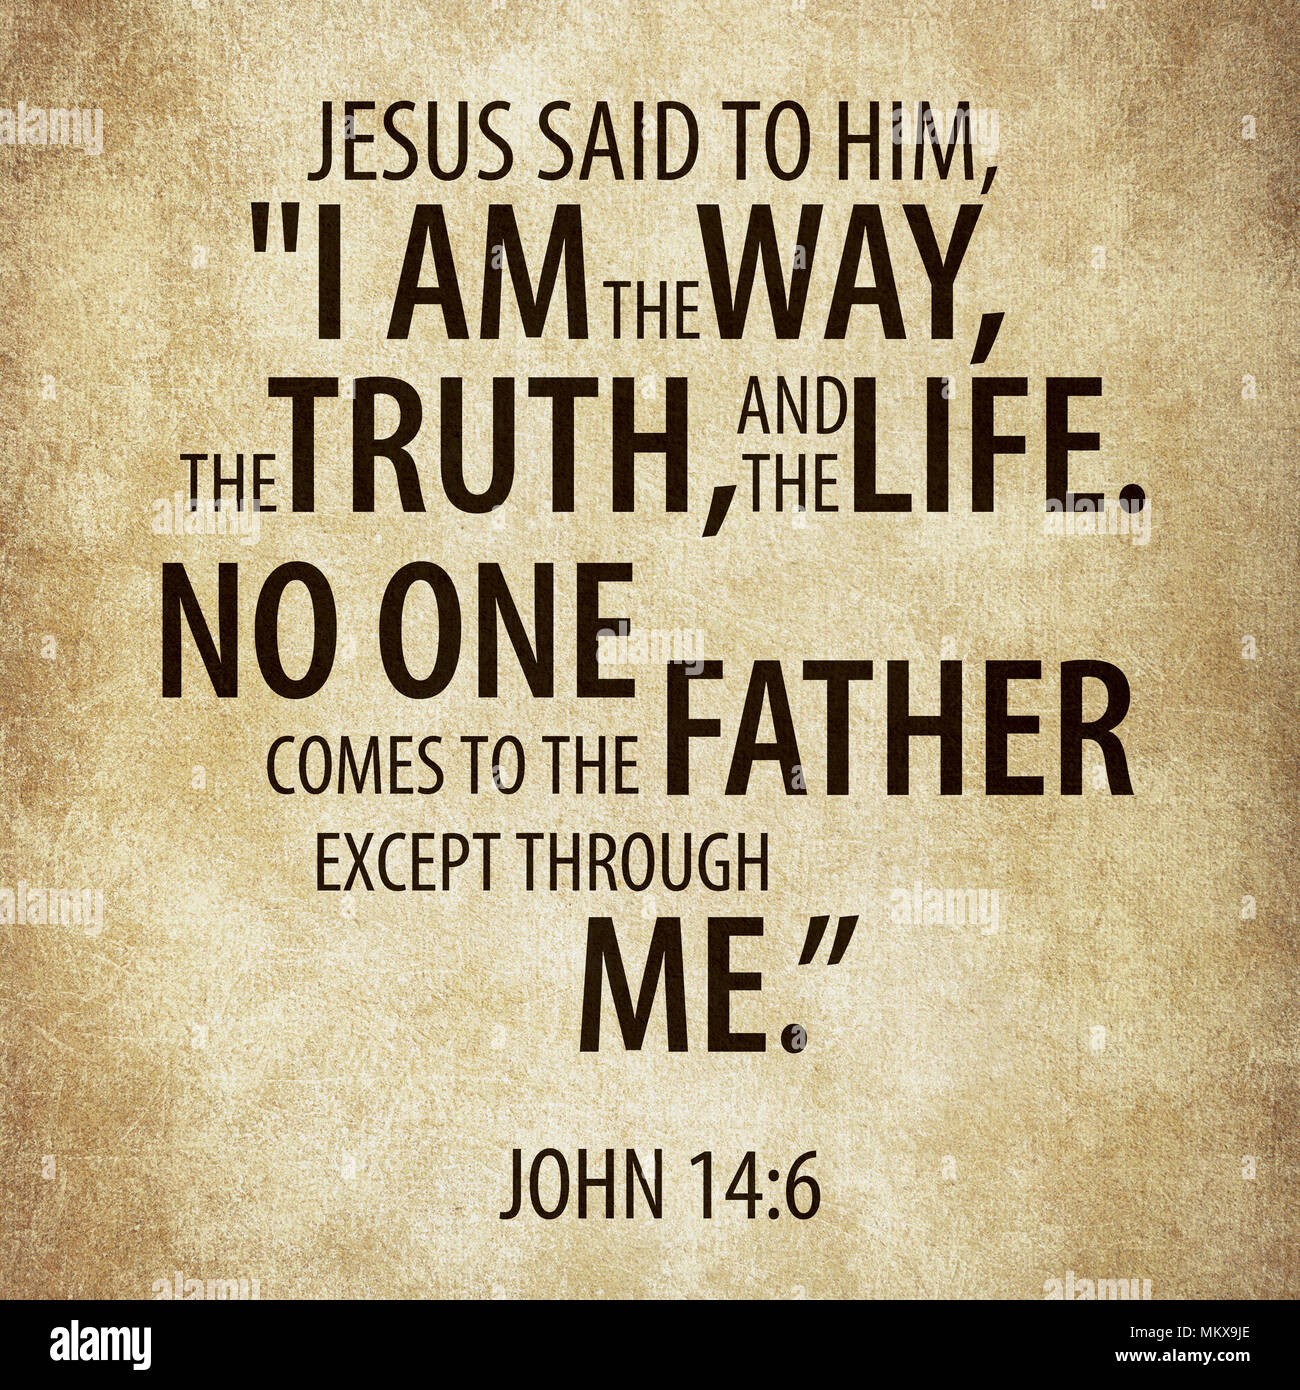 jesus-said-to-him-i-am-the-way-the-truth-and-the-life-no-one-comes-to-the-father-except-through-me-john-146-MKX9JE.jpg